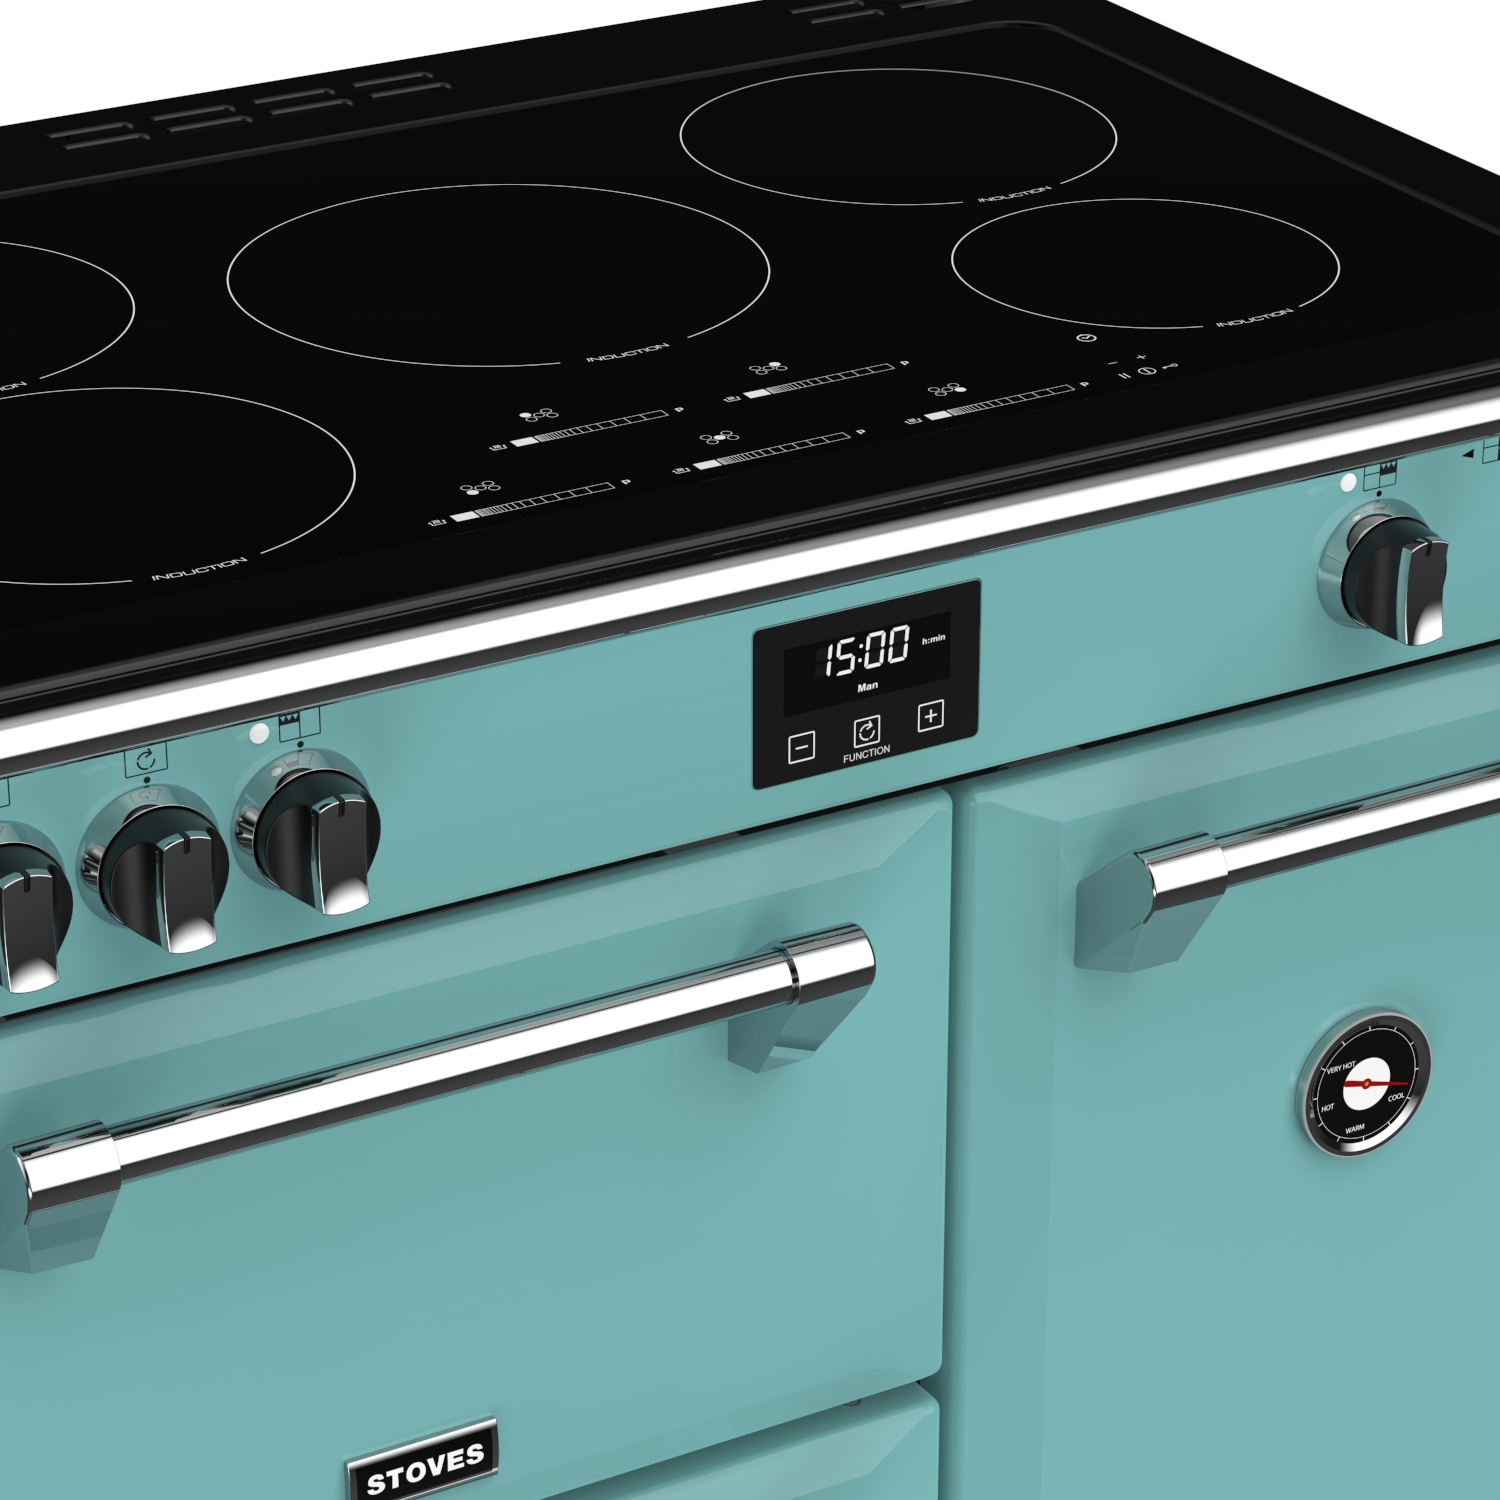 STOVES Richmond 164 Liter) S900 Induktion, (EEK Blue/Chrom A, EI Induktion Country Deluxe Standherd